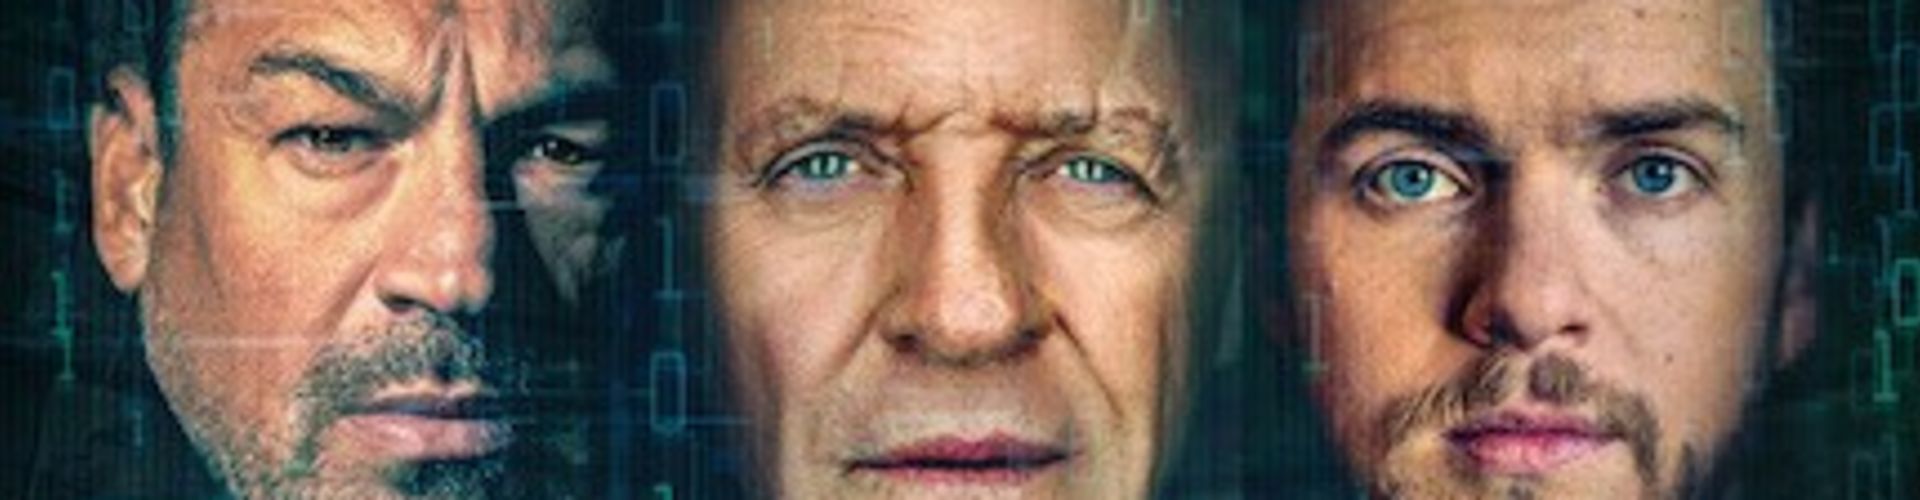 Zero Contact Trailer Is Out, Starring Anthony Hopkins